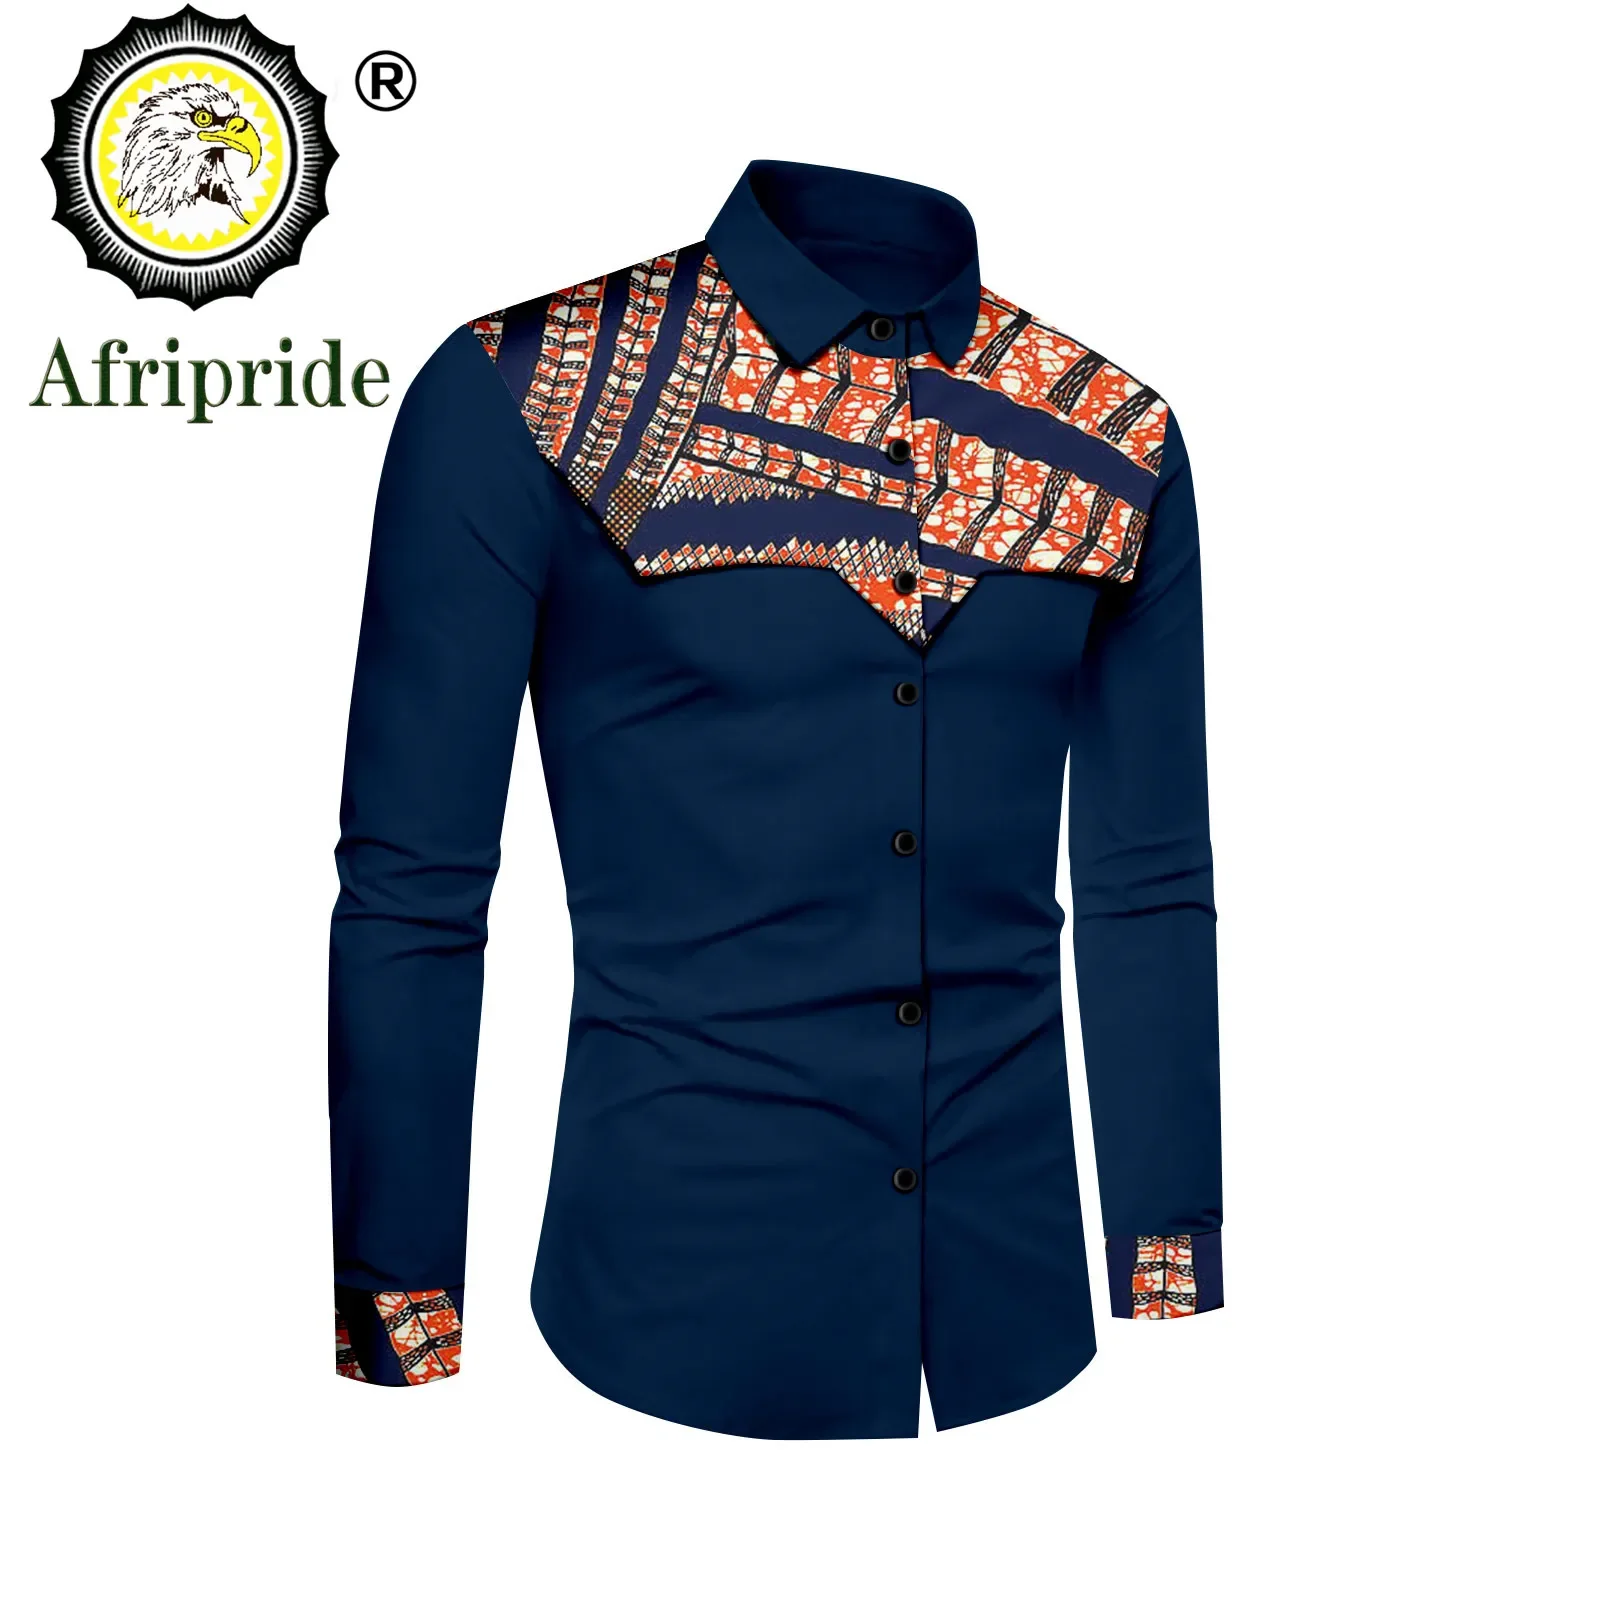 African Shirts for Man Print Clothing Dashiki Tops Ankara Formal Men Shirt Full Sleeve Stand Neck Slim Fit Suit Shirts A2212010 african clothes for men dashiki shirt pants suit two piece round neck business casual noble wedding banquet activity dress